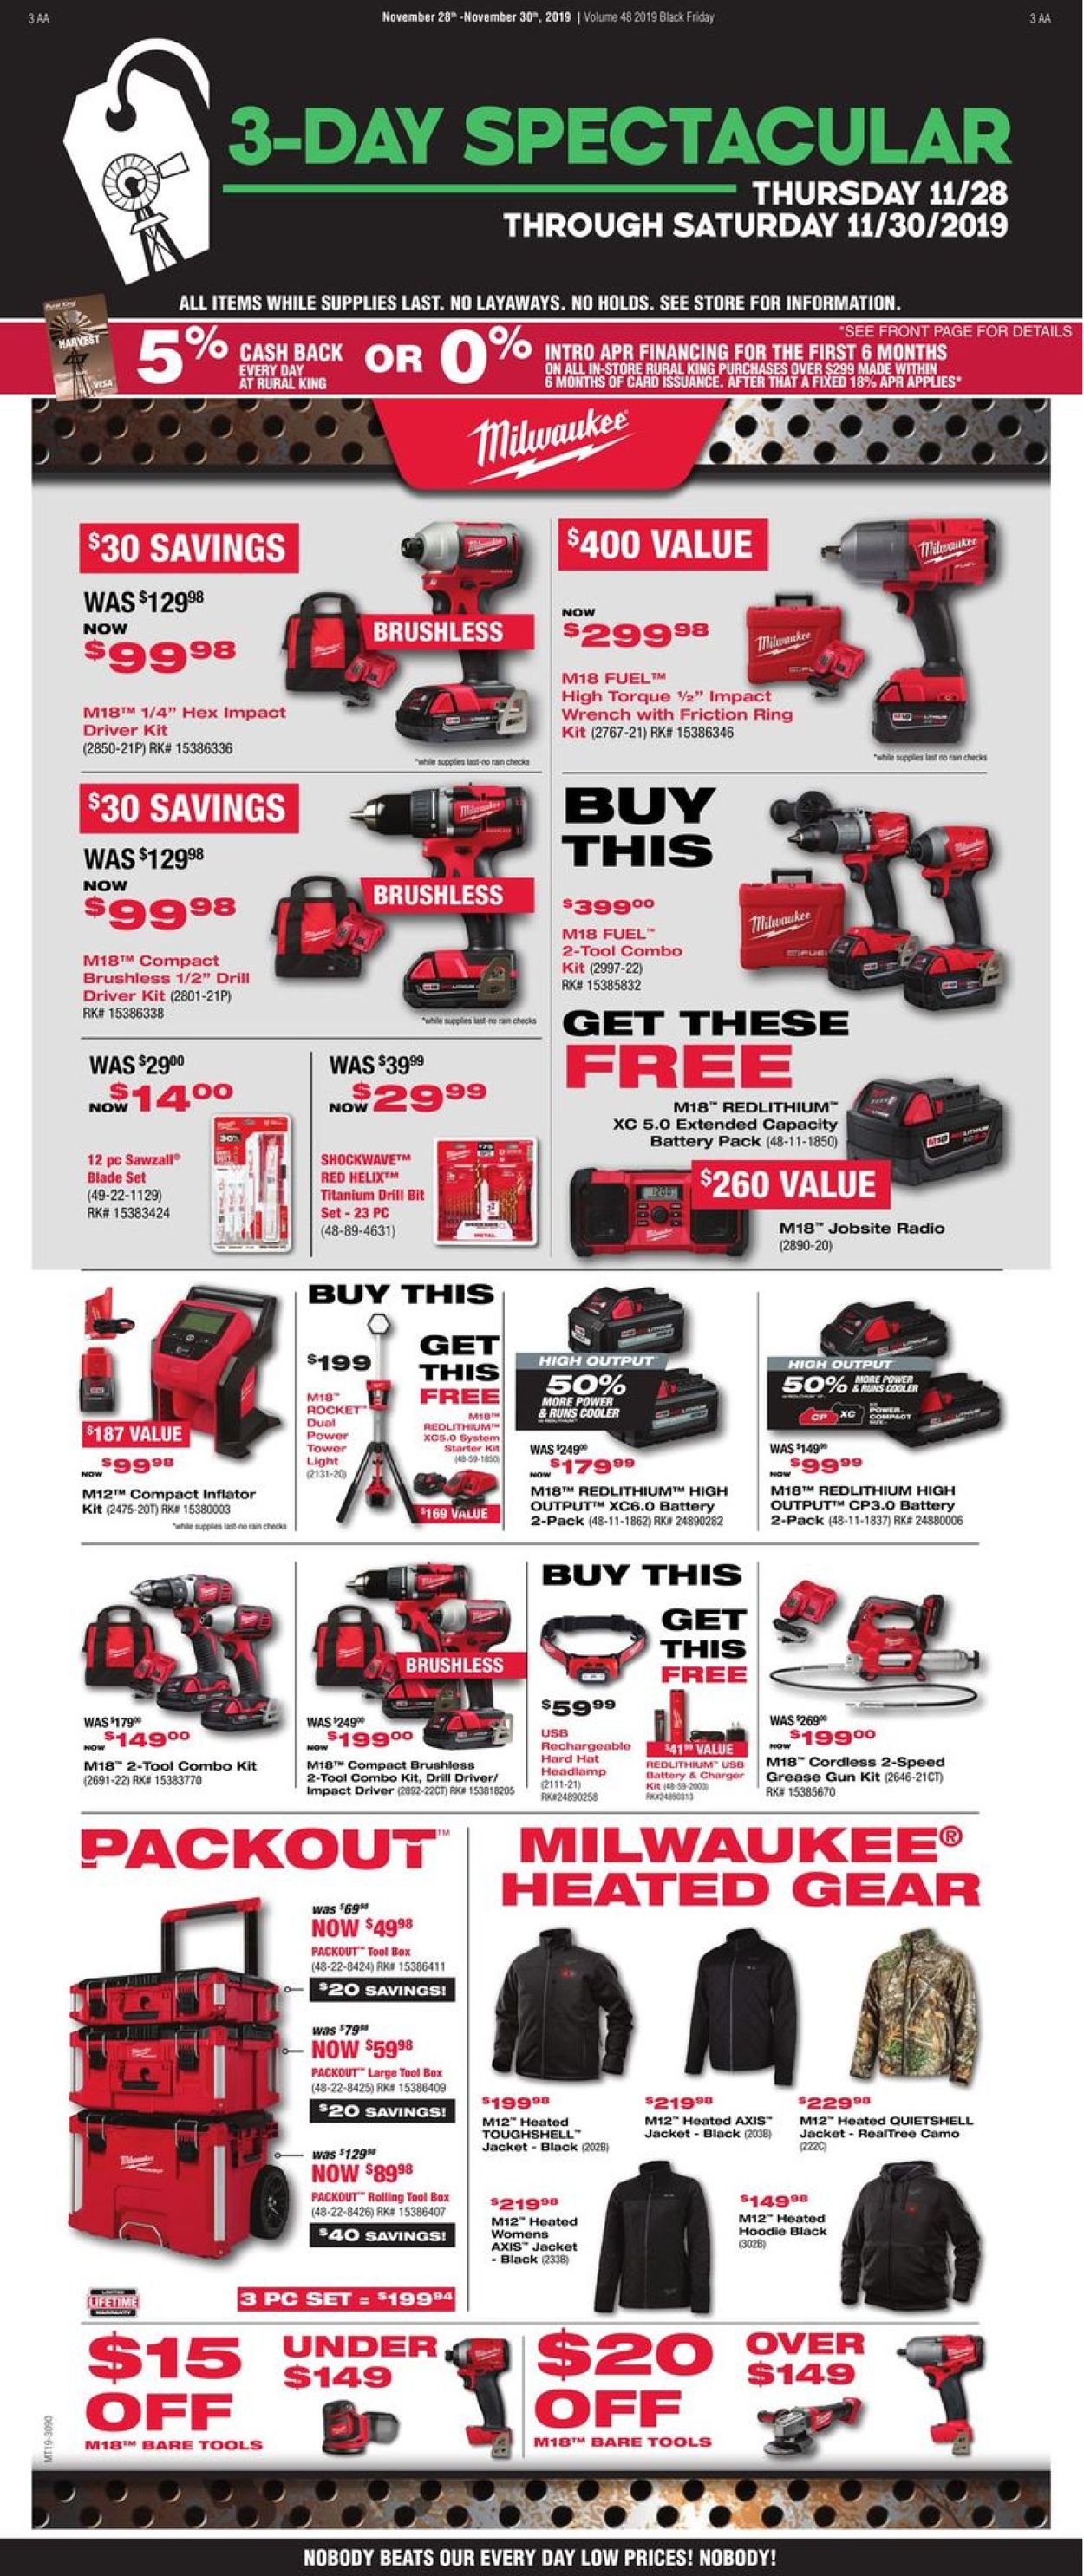 Catalogue Rural King - Black Friday Ad 2019 from 11/24/2019